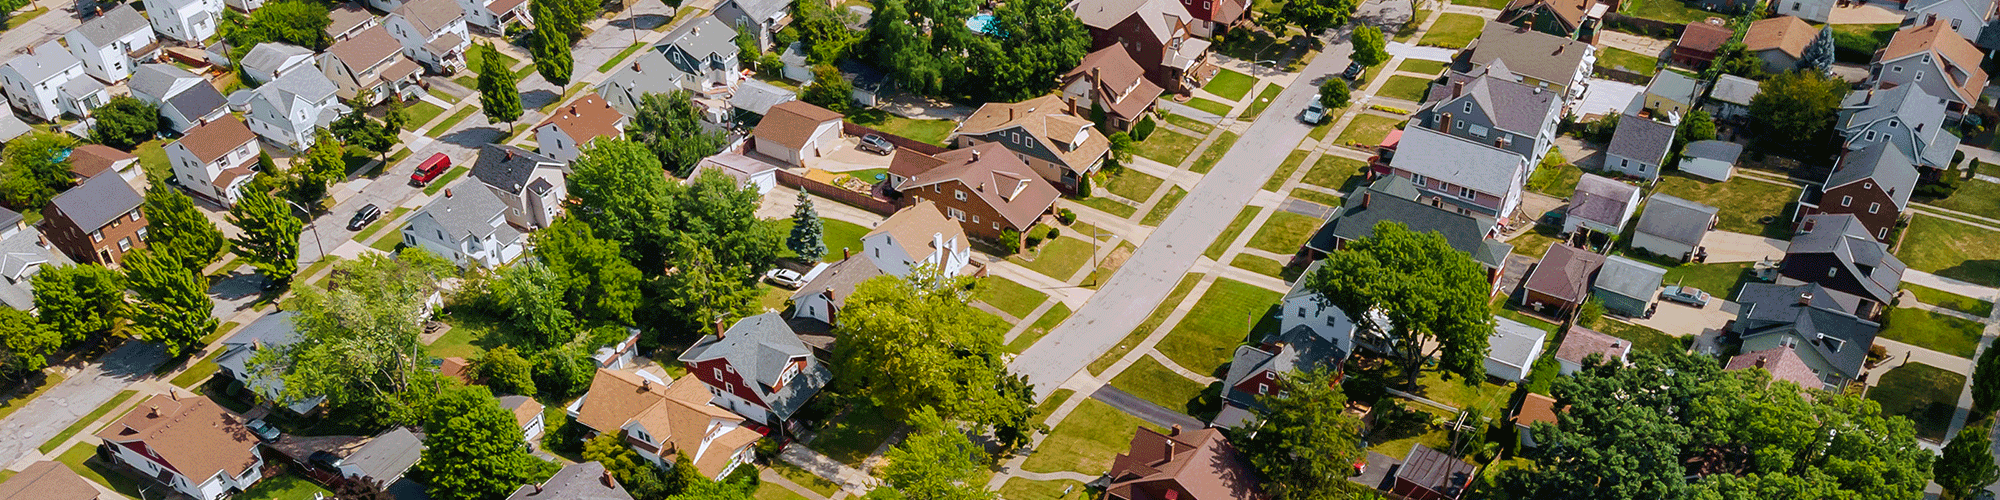 A top-down drone view of a suburban neighborhood